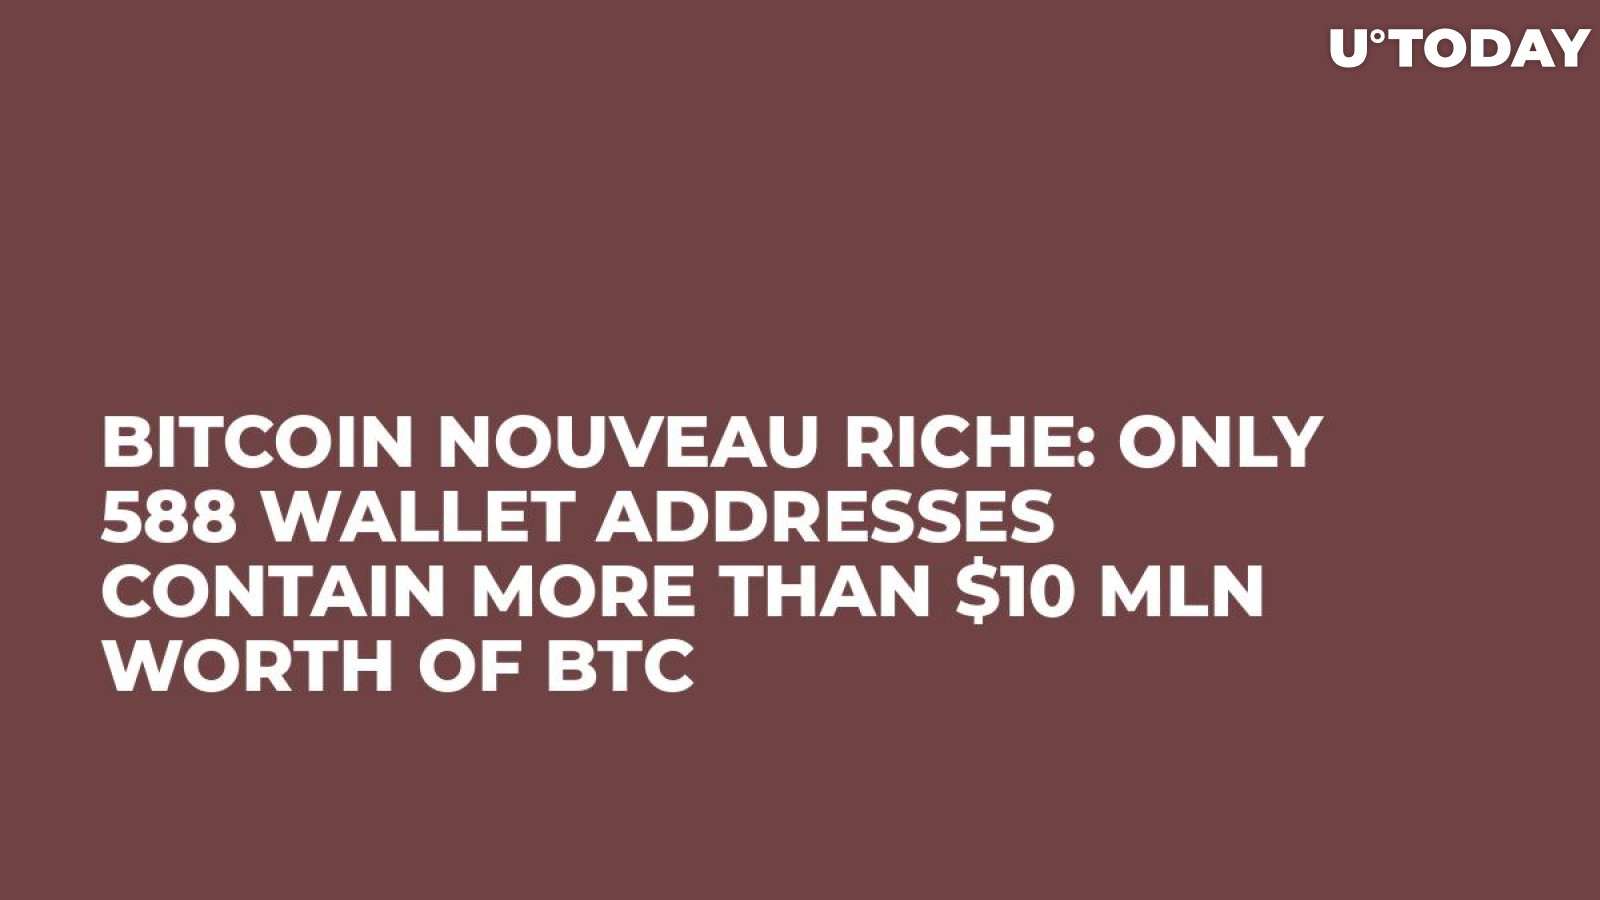 Bitcoin Nouveau Riche: Only 588 Wallet Addresses Contain More Than $10 Mln Worth of BTC